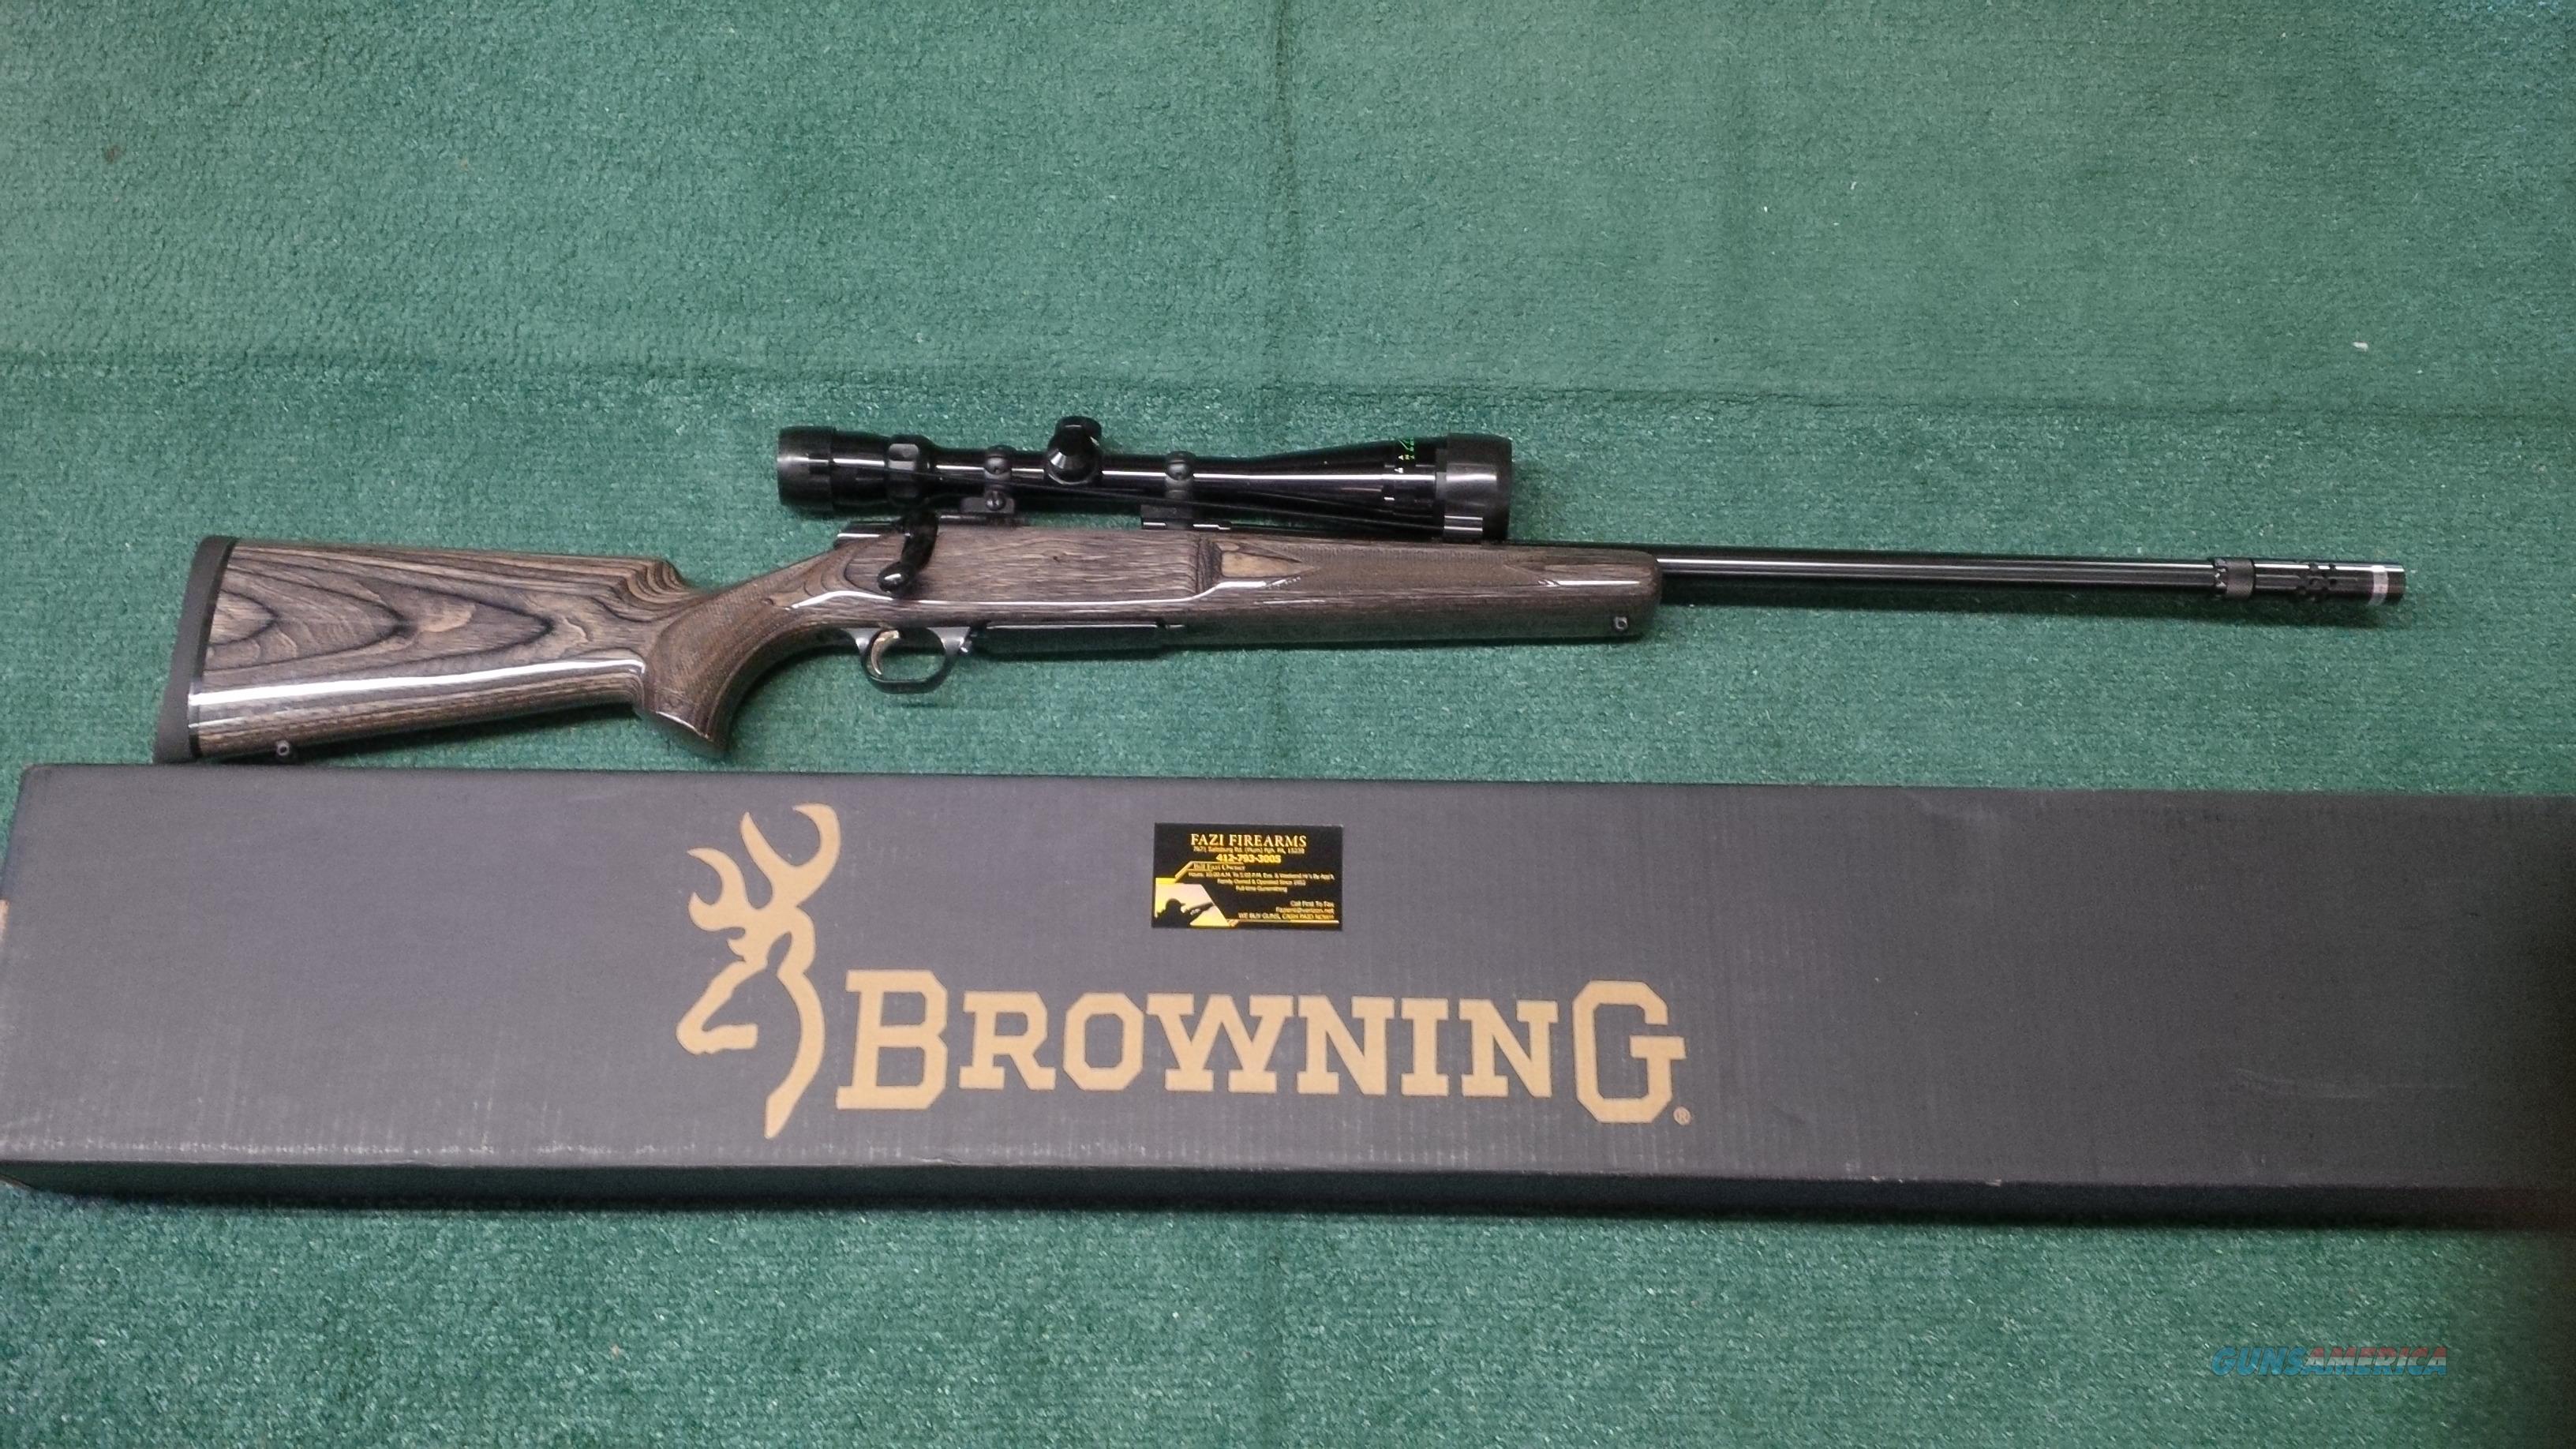 Browning 22 Bolt Action Rifle